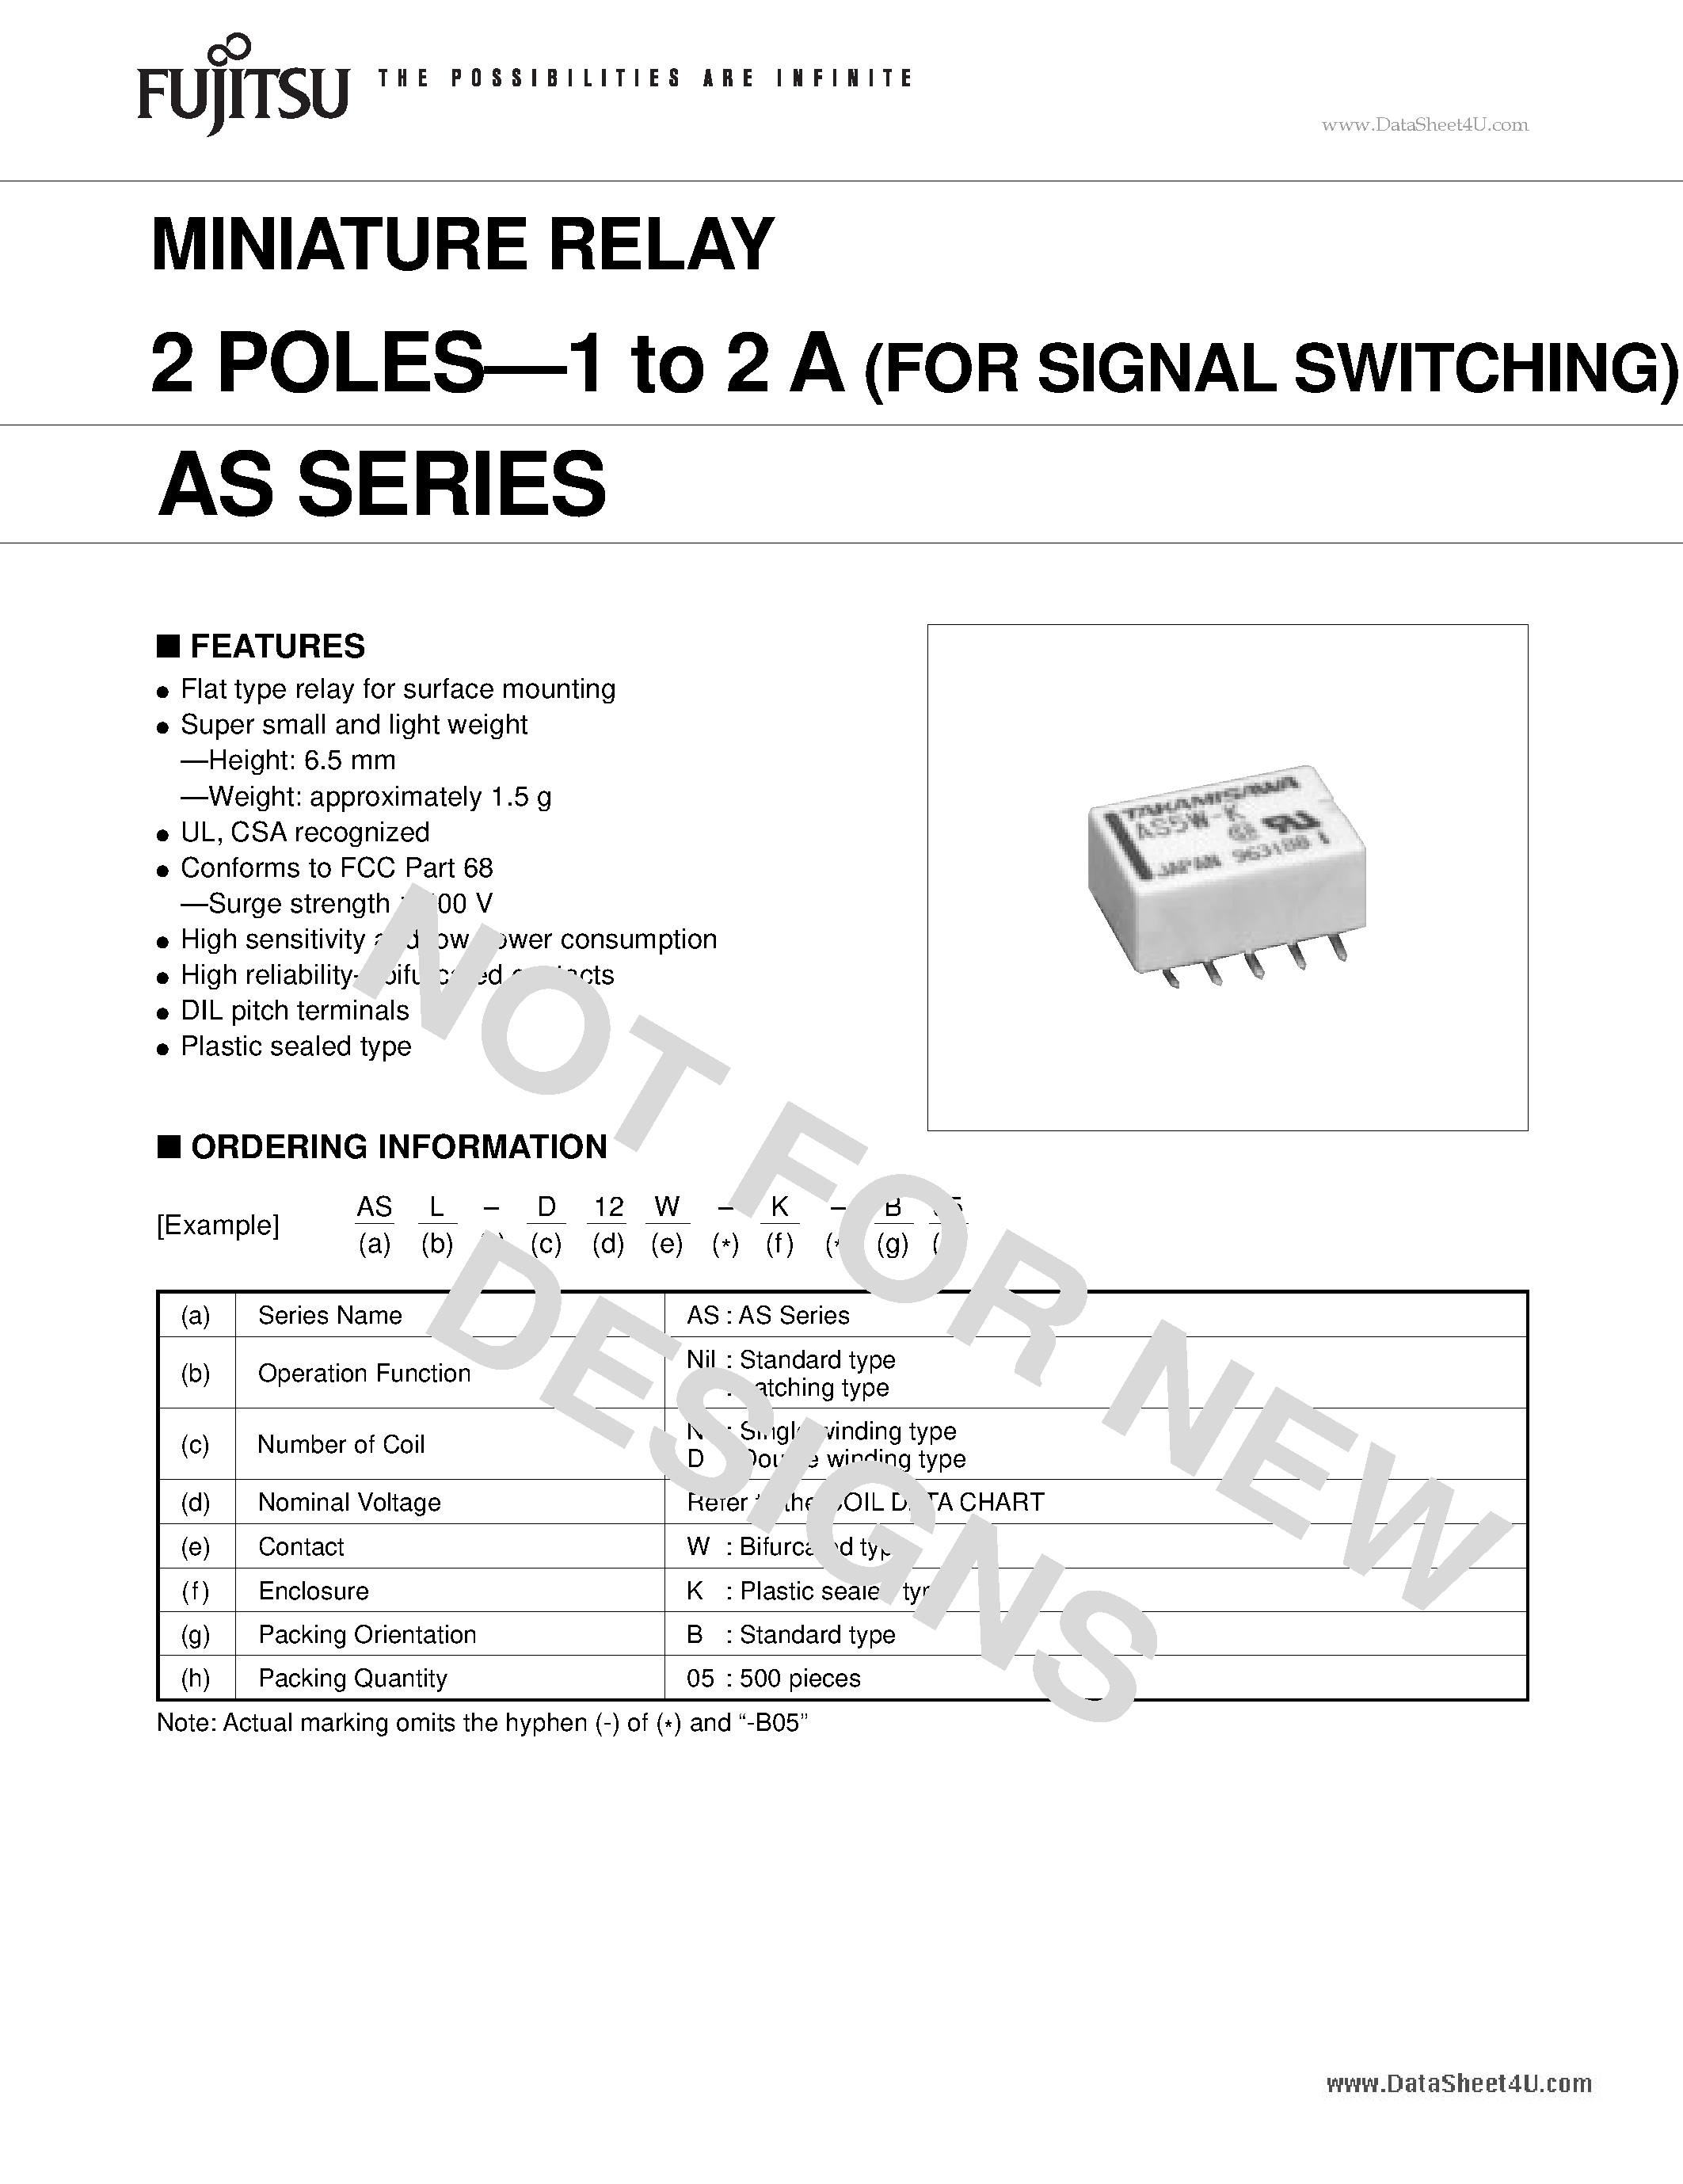 Datasheet AS-1.5W-K - MINIATURE RELAY 2 POLES-1 to 2 A page 1